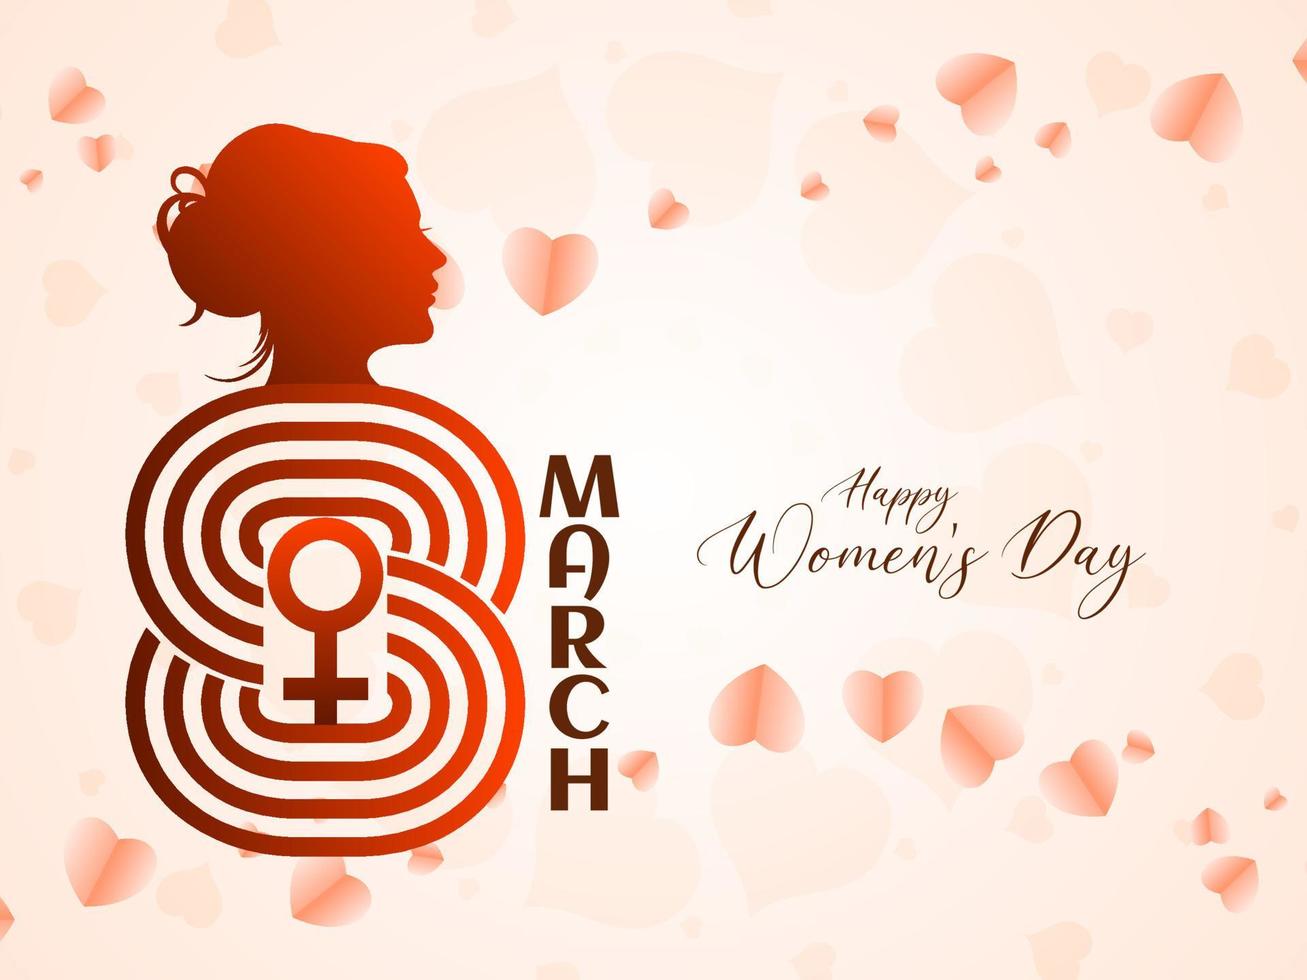 Happy Women's Day 8 march stylish background design vector